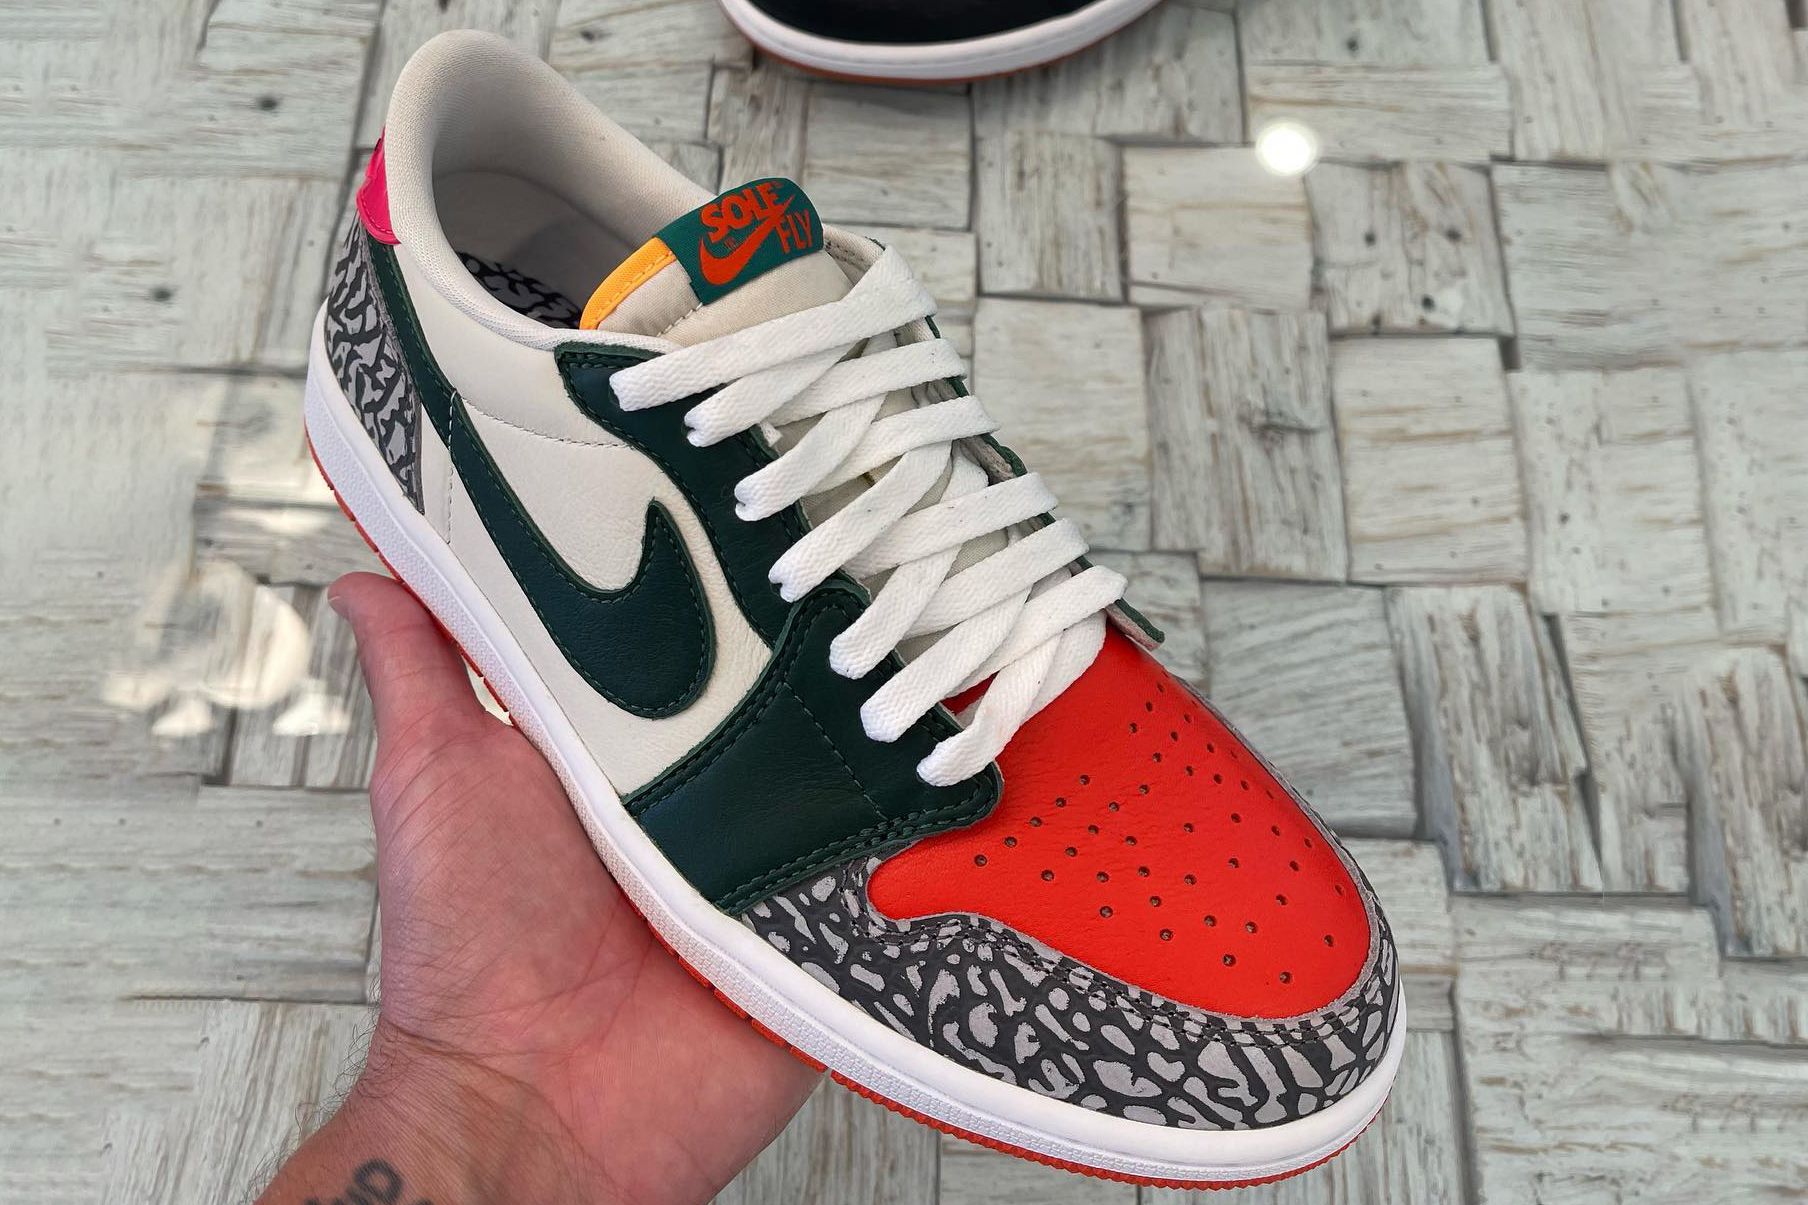 Check Out This Solefly x Air Jordan 1 Low 'What the Solefly